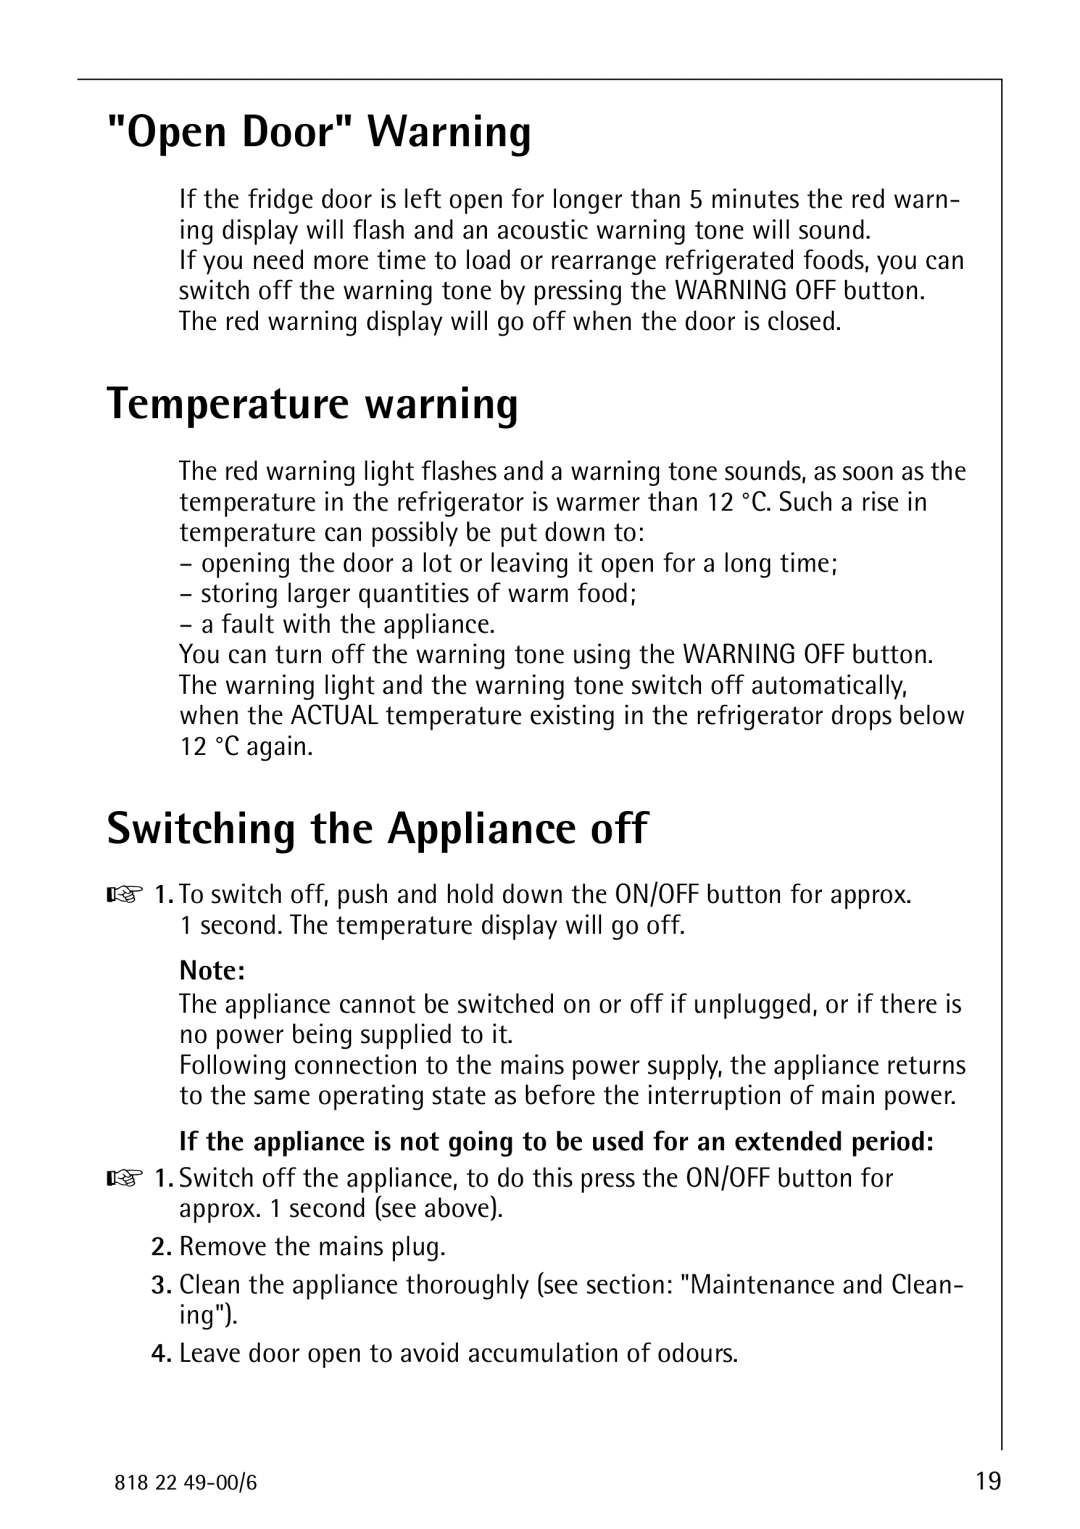 Electrolux SANTO 3778-8 KA manual Open Door Warning, Temperature warning, Switching the Appliance off 